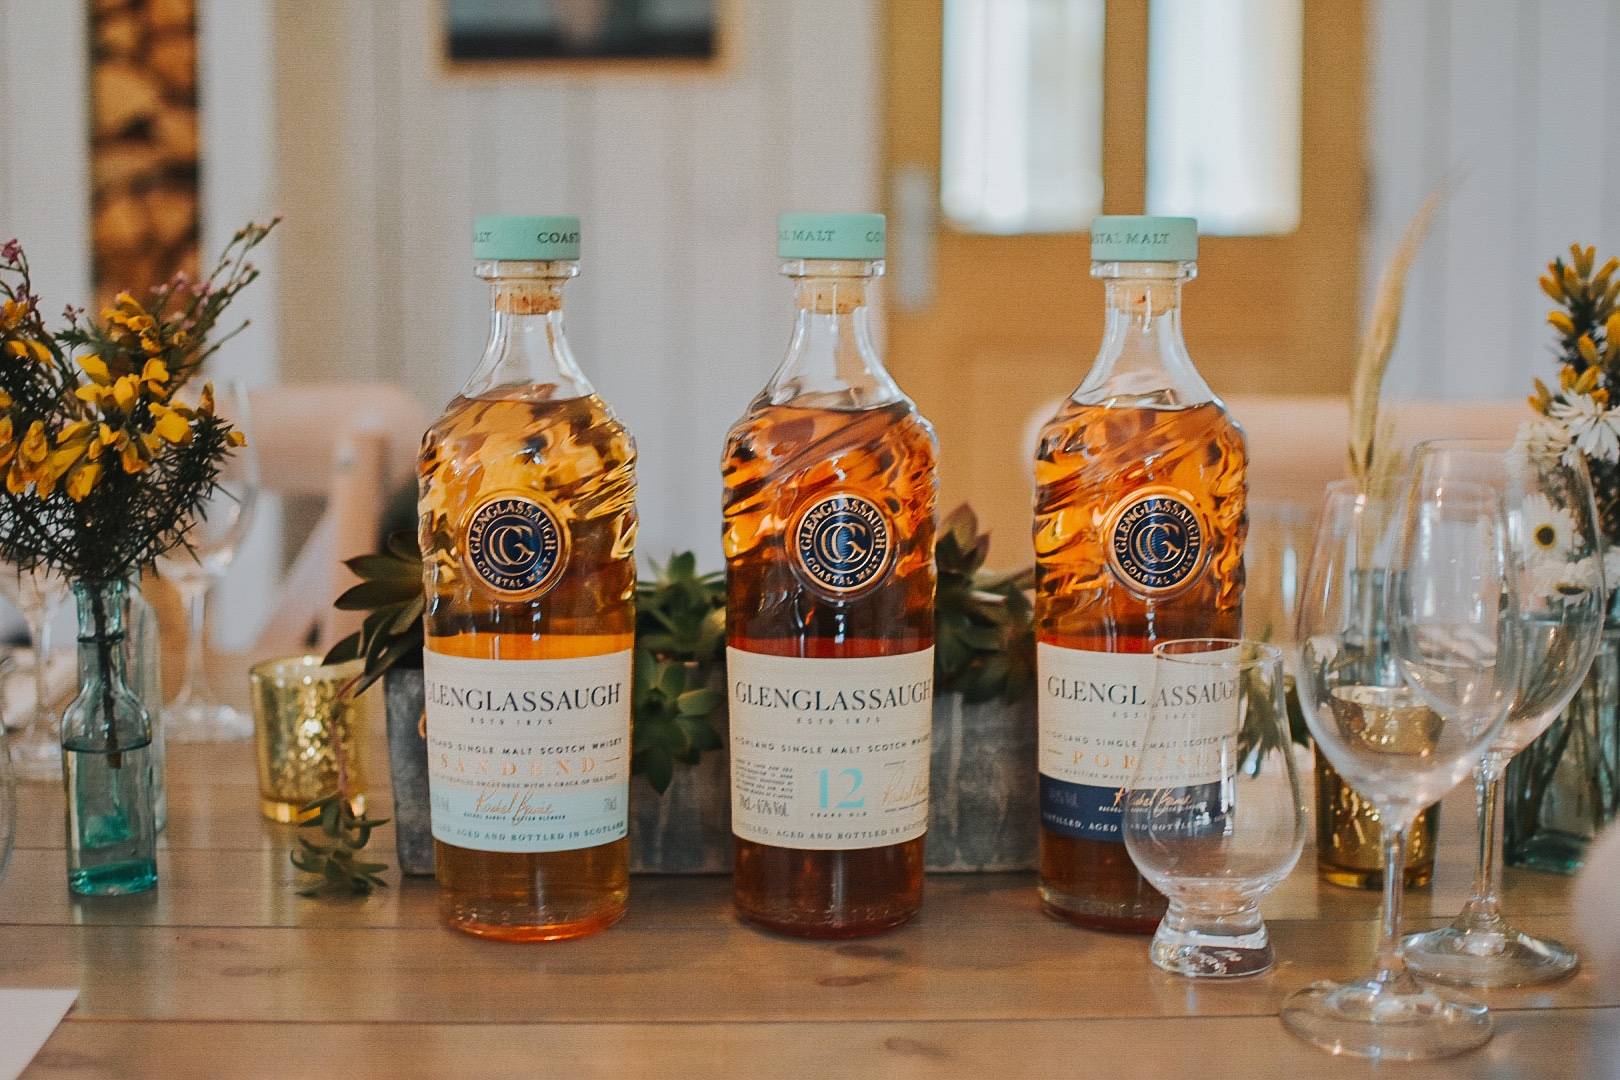 The 2023 Relaunch of Glenglassaugh Distillery - Sandend, Portsoy